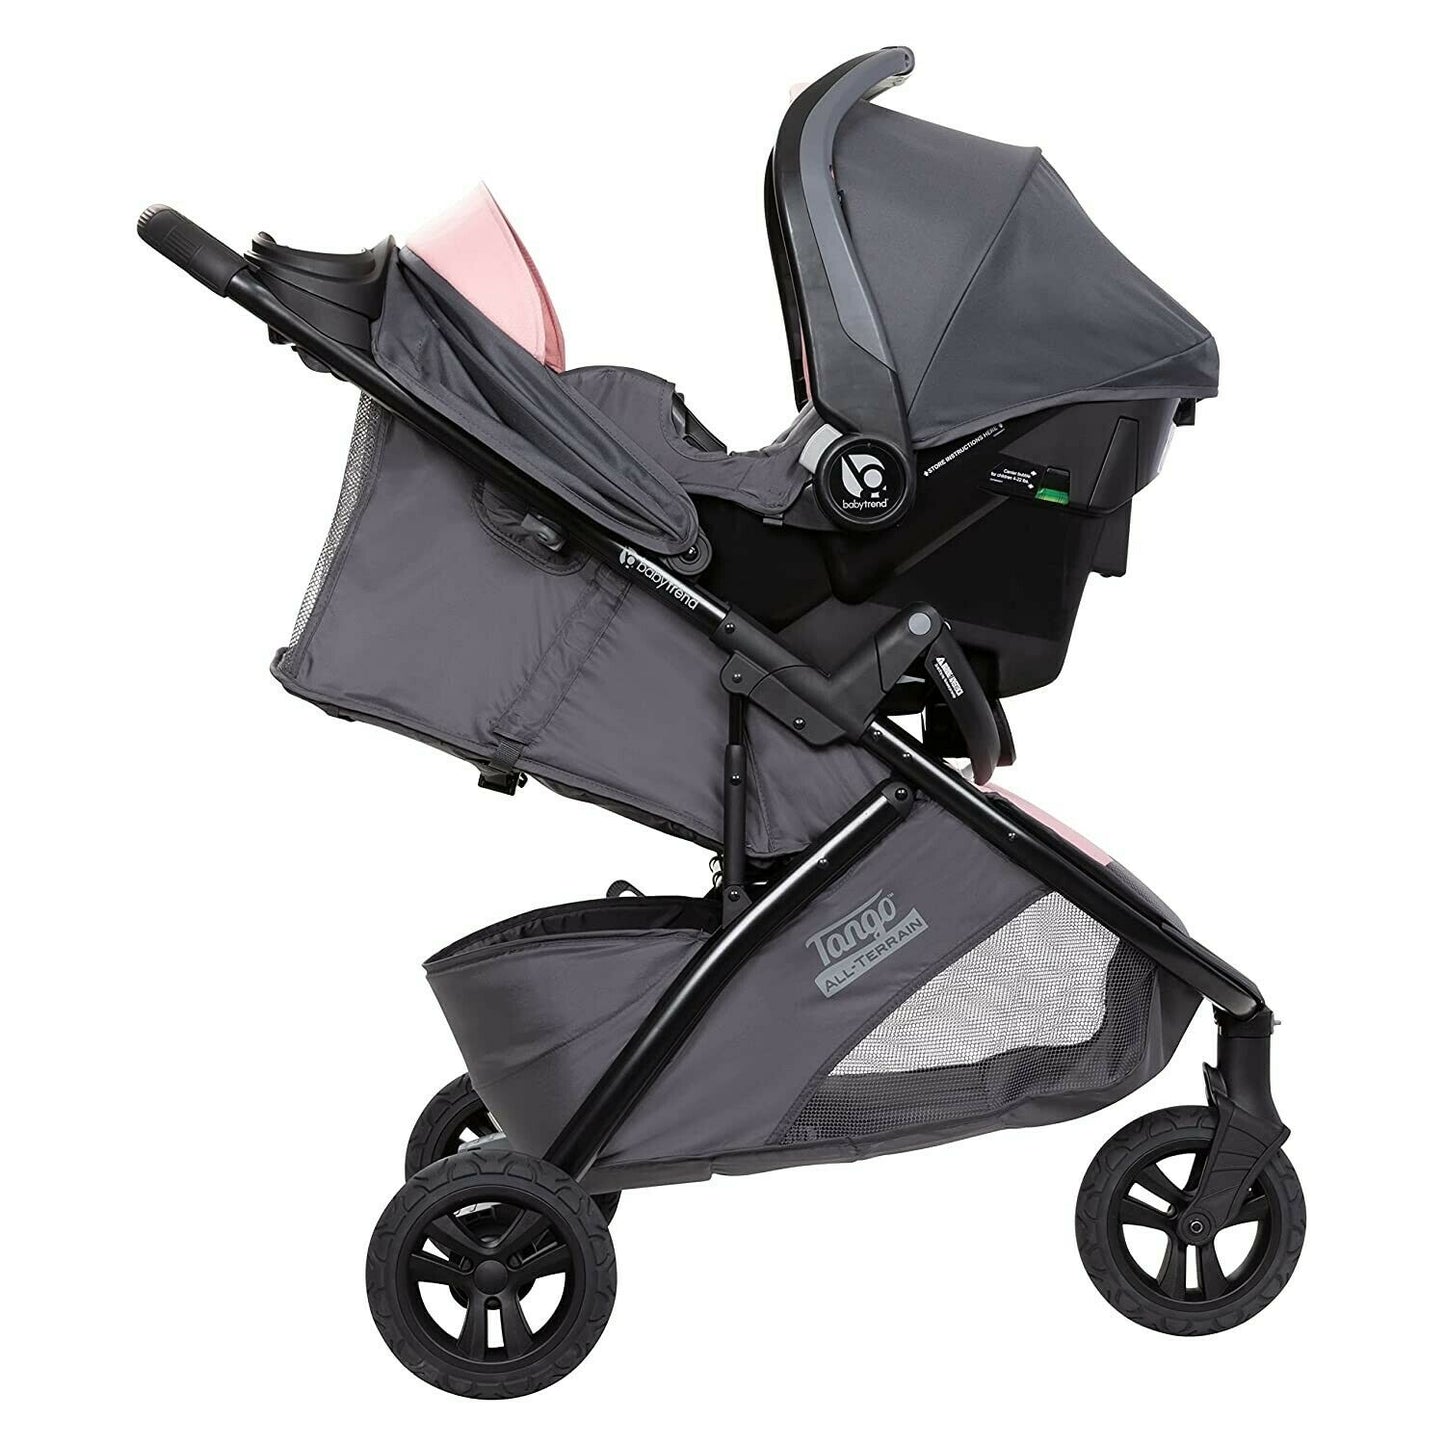 Pink Combo Baby Stroller with Car Seat Travel System Playard Diaper Bag Set